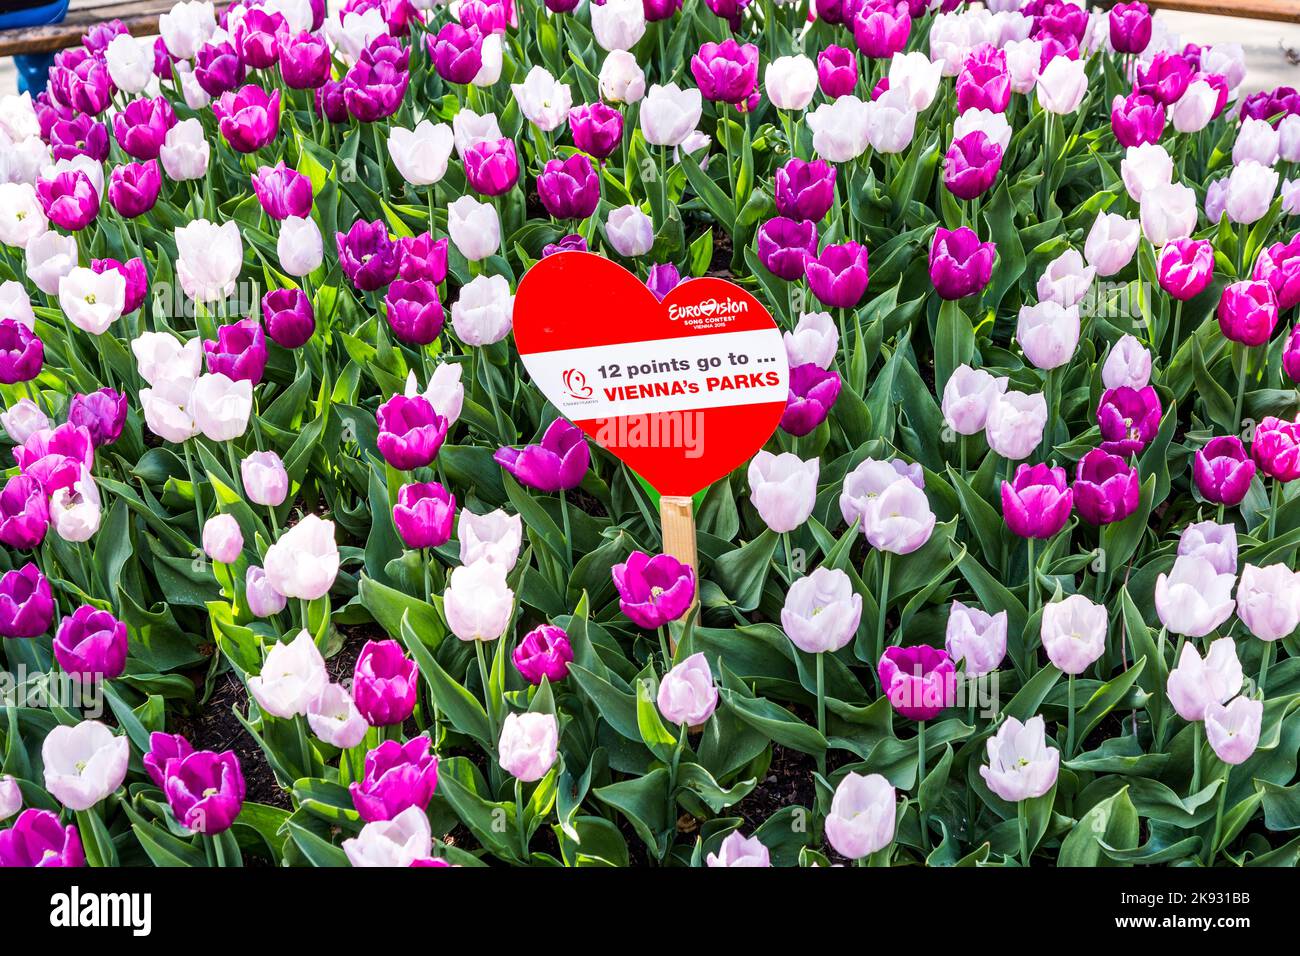 VIENNA, AUSTRIA - APR 27, 2015:  heart shape in the park with tulips for the european song contest in Vienna, Austria. Conchita Wurst was the winner i Stock Photo